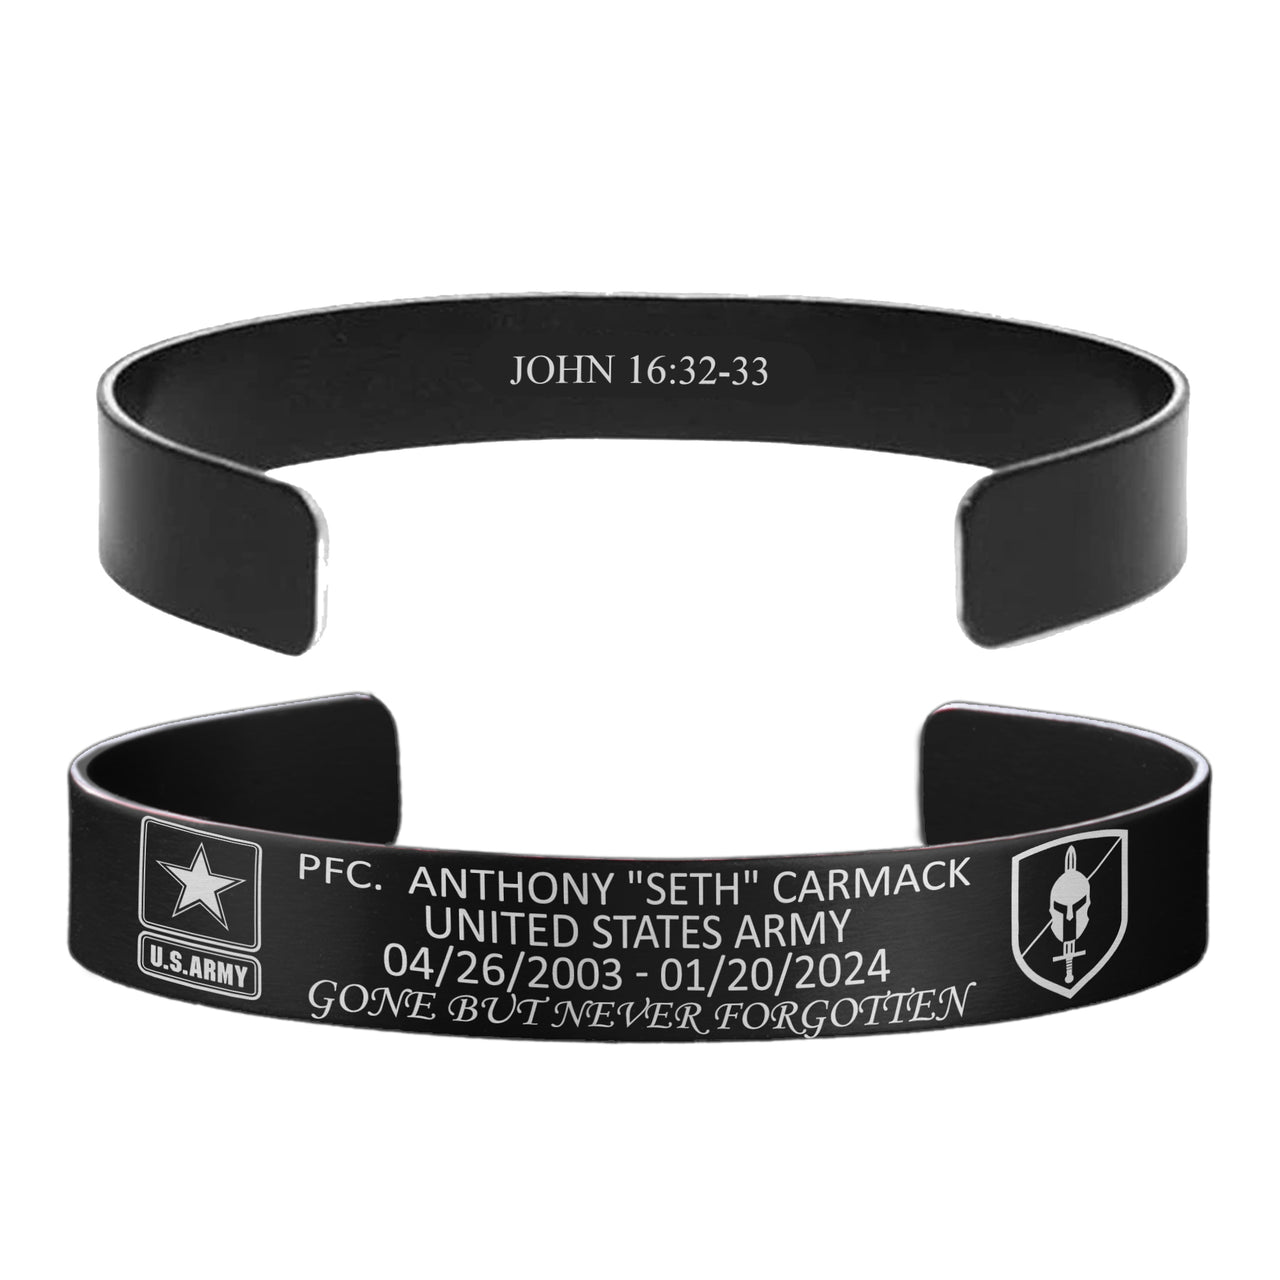 PFC Anthony "Seth" Carmack Memorial Band – Hosted by the Kilgore Family